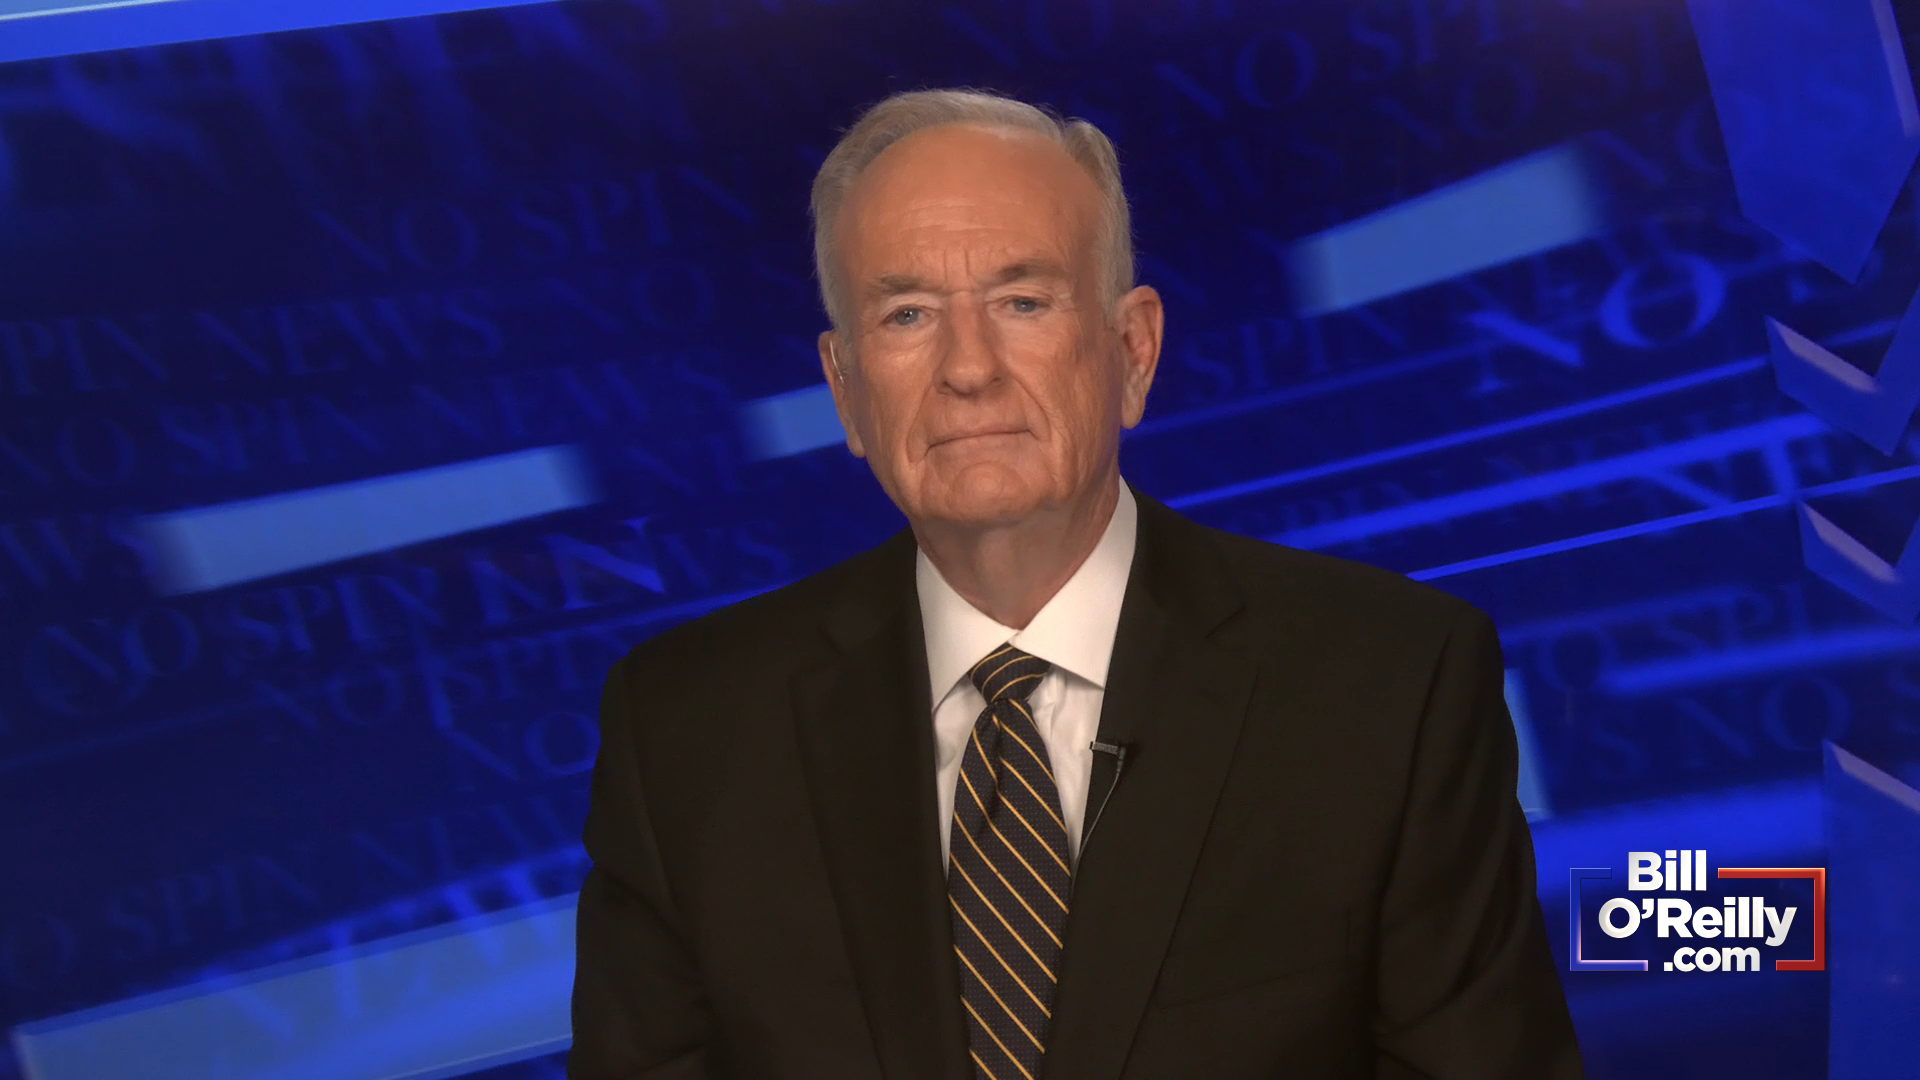 O'Reilly: 'They're Trying to Prop Up Kamala Harris'